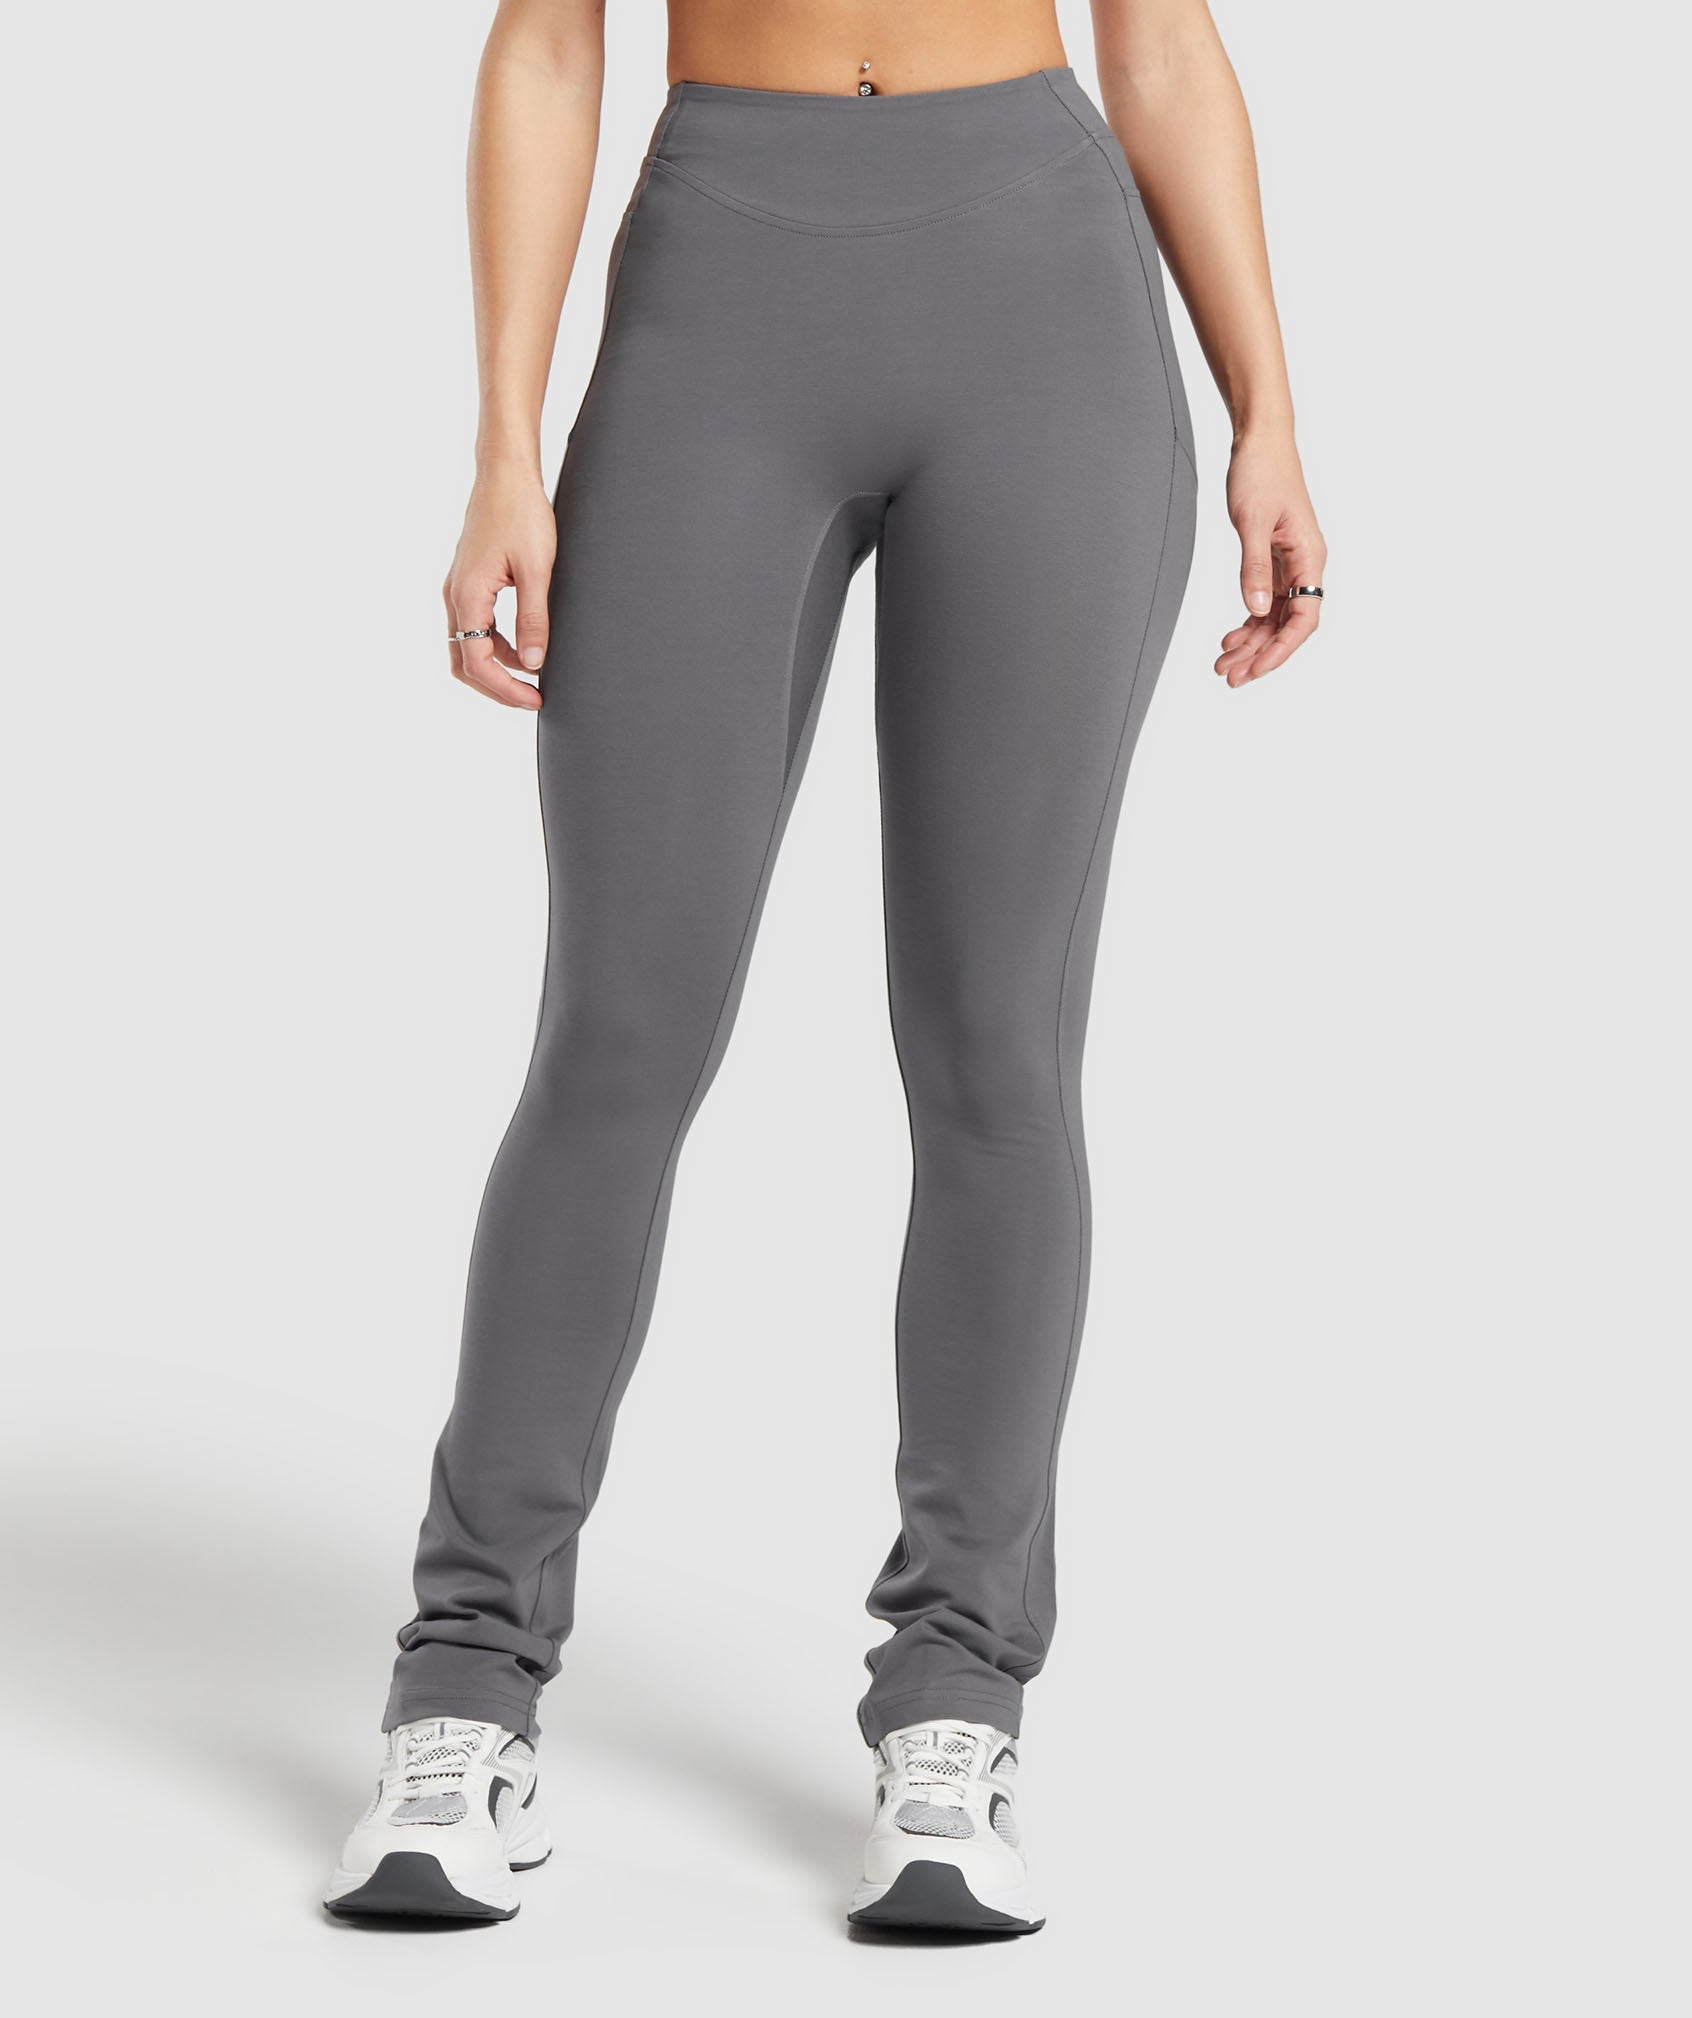 Fabletics Women's Gray Seamless Ruched Athletic High Waist